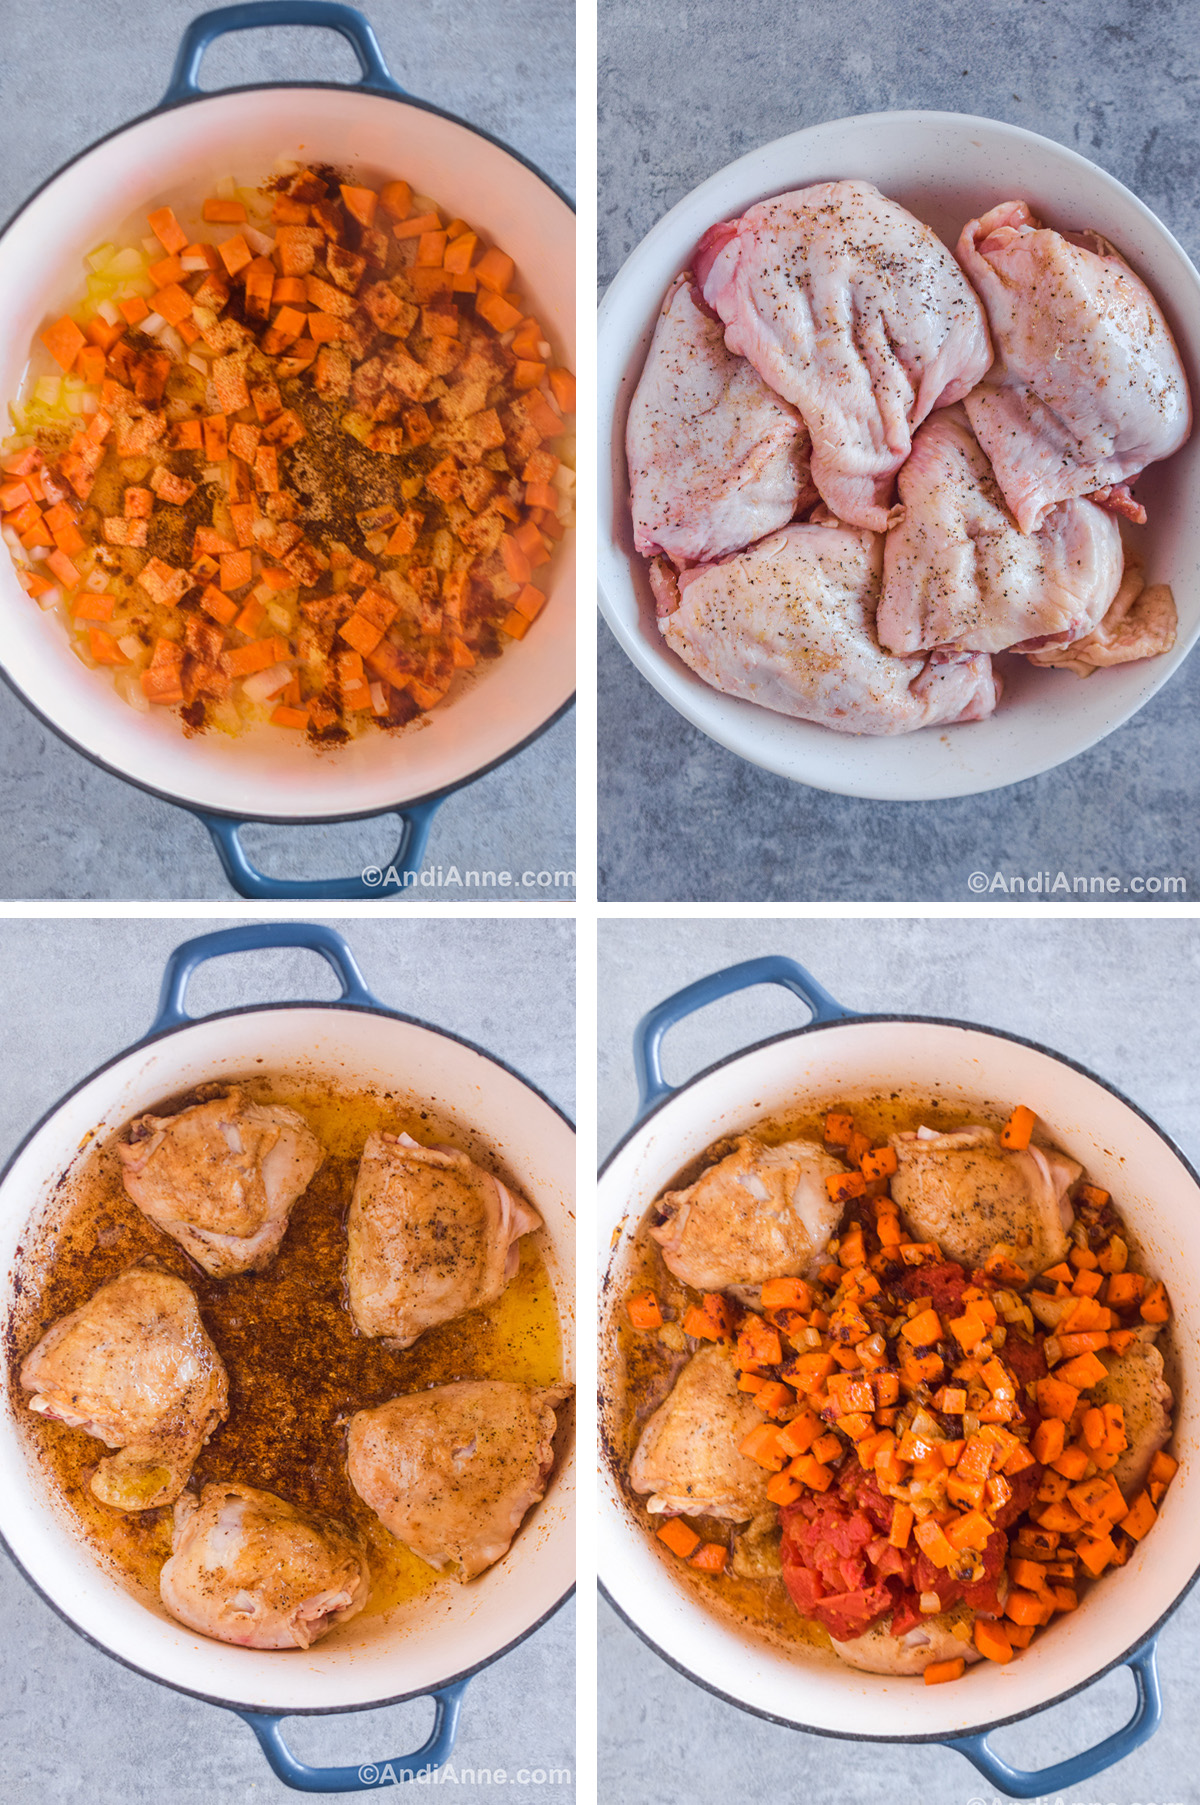 Four images grouped together showing steps to make the recipe. First is chopped sweet potato and onion sprinkled with spices in a pot. Browned chicken thighs in a pot. And cooked sweet potato and tomatoes dumped in to the pot over chicken thighs.